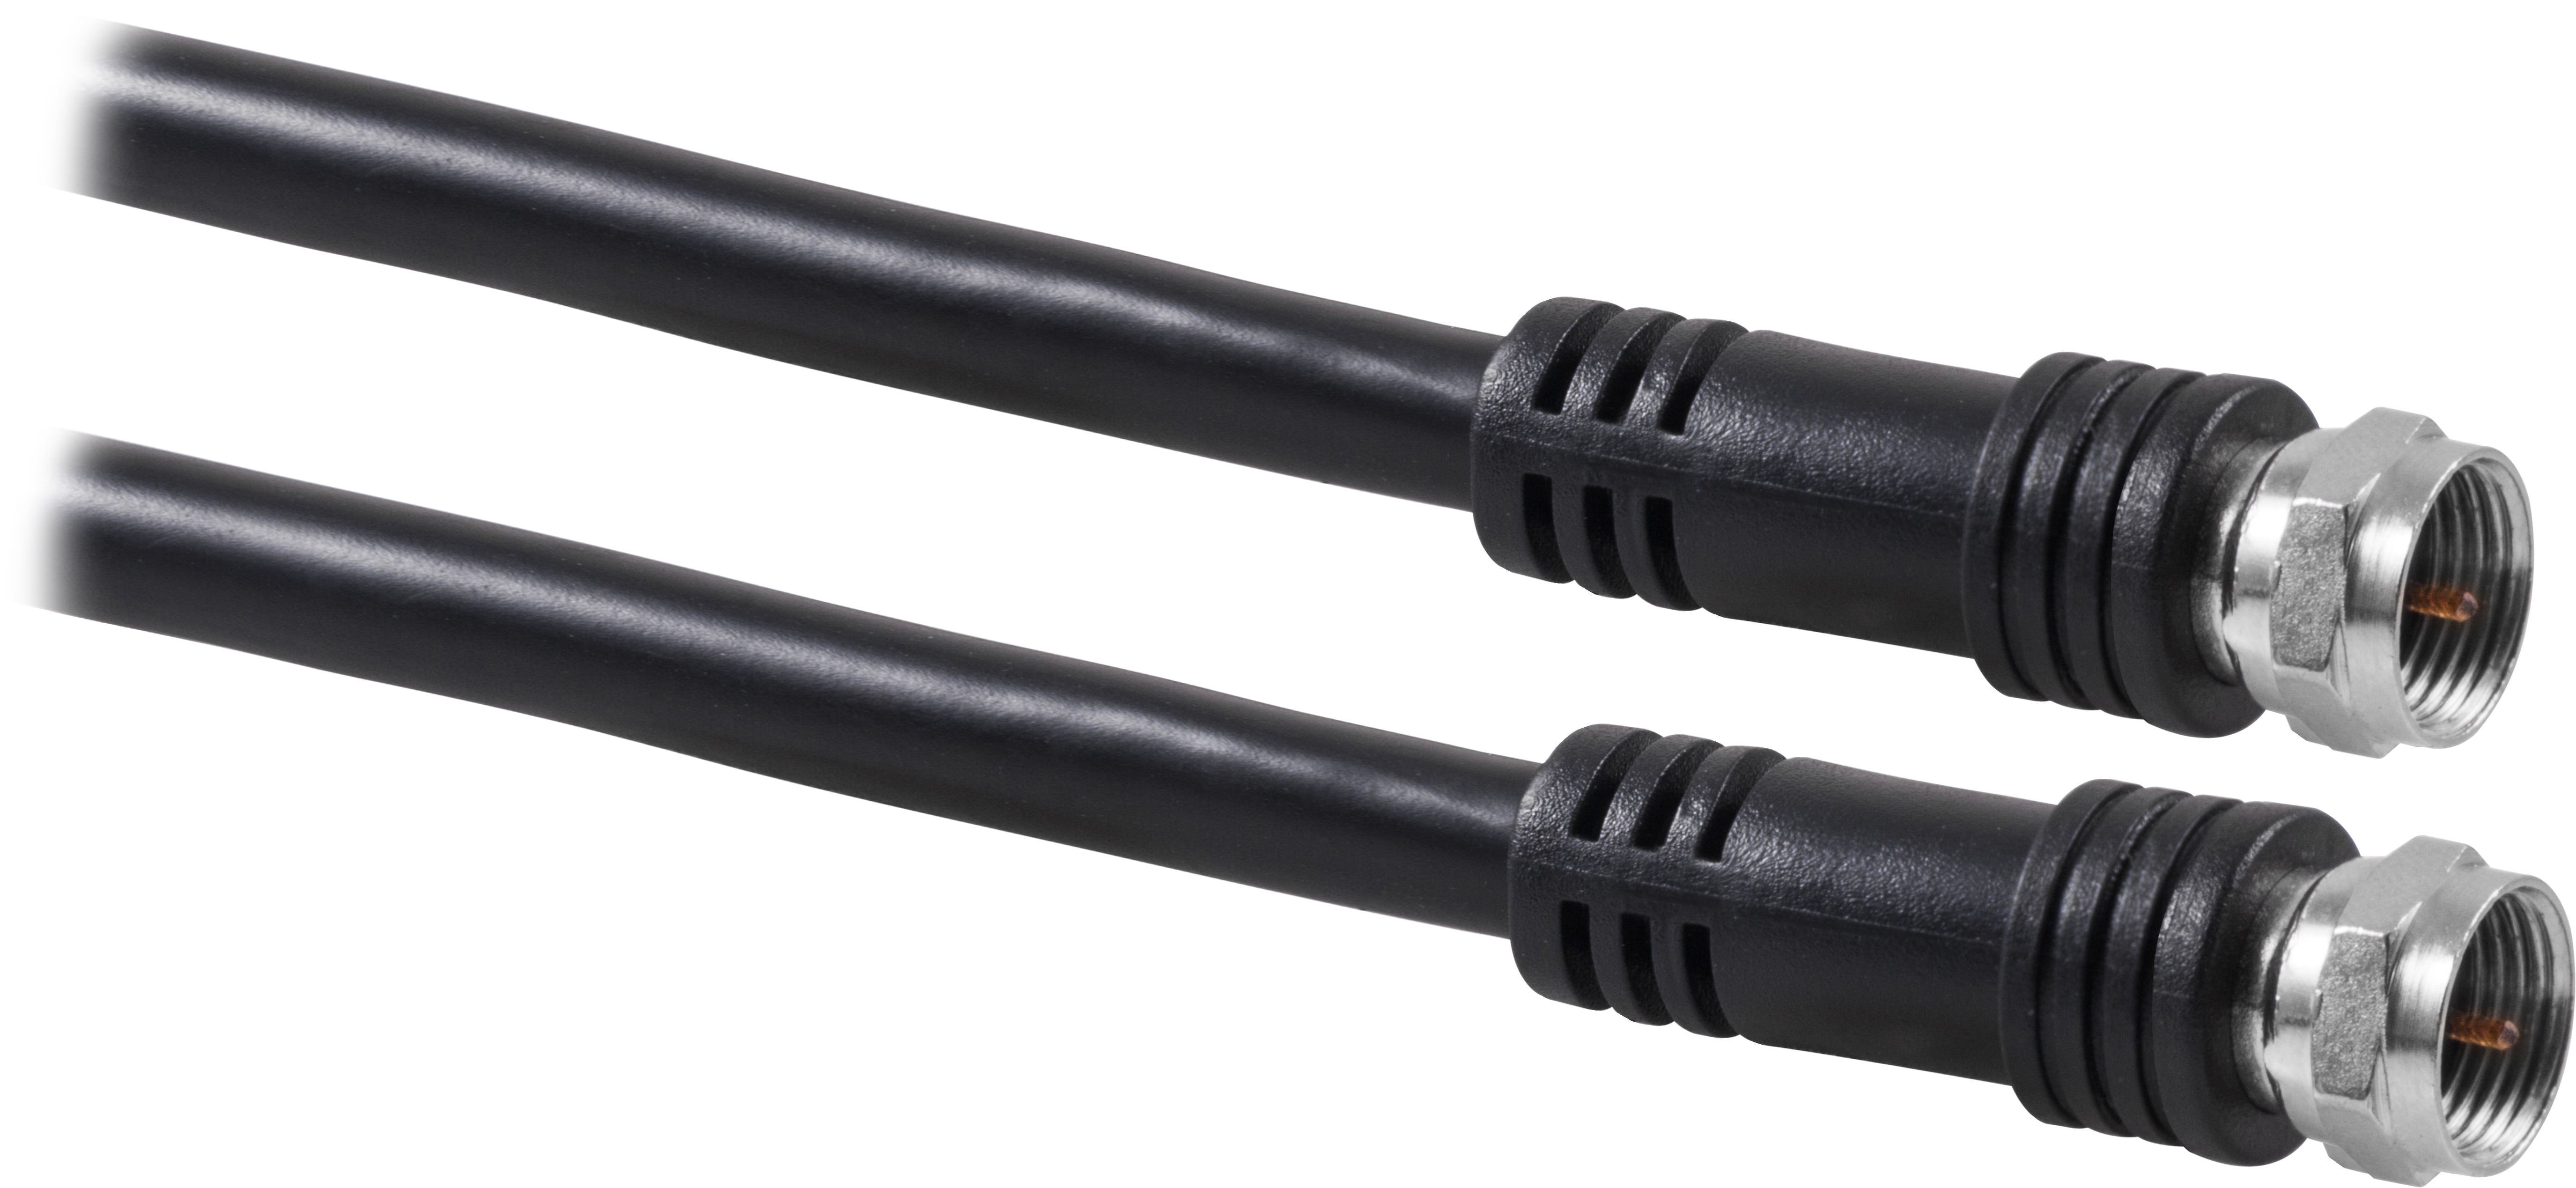 Onn Rg6 Coaxial Cables 15 Ft Black